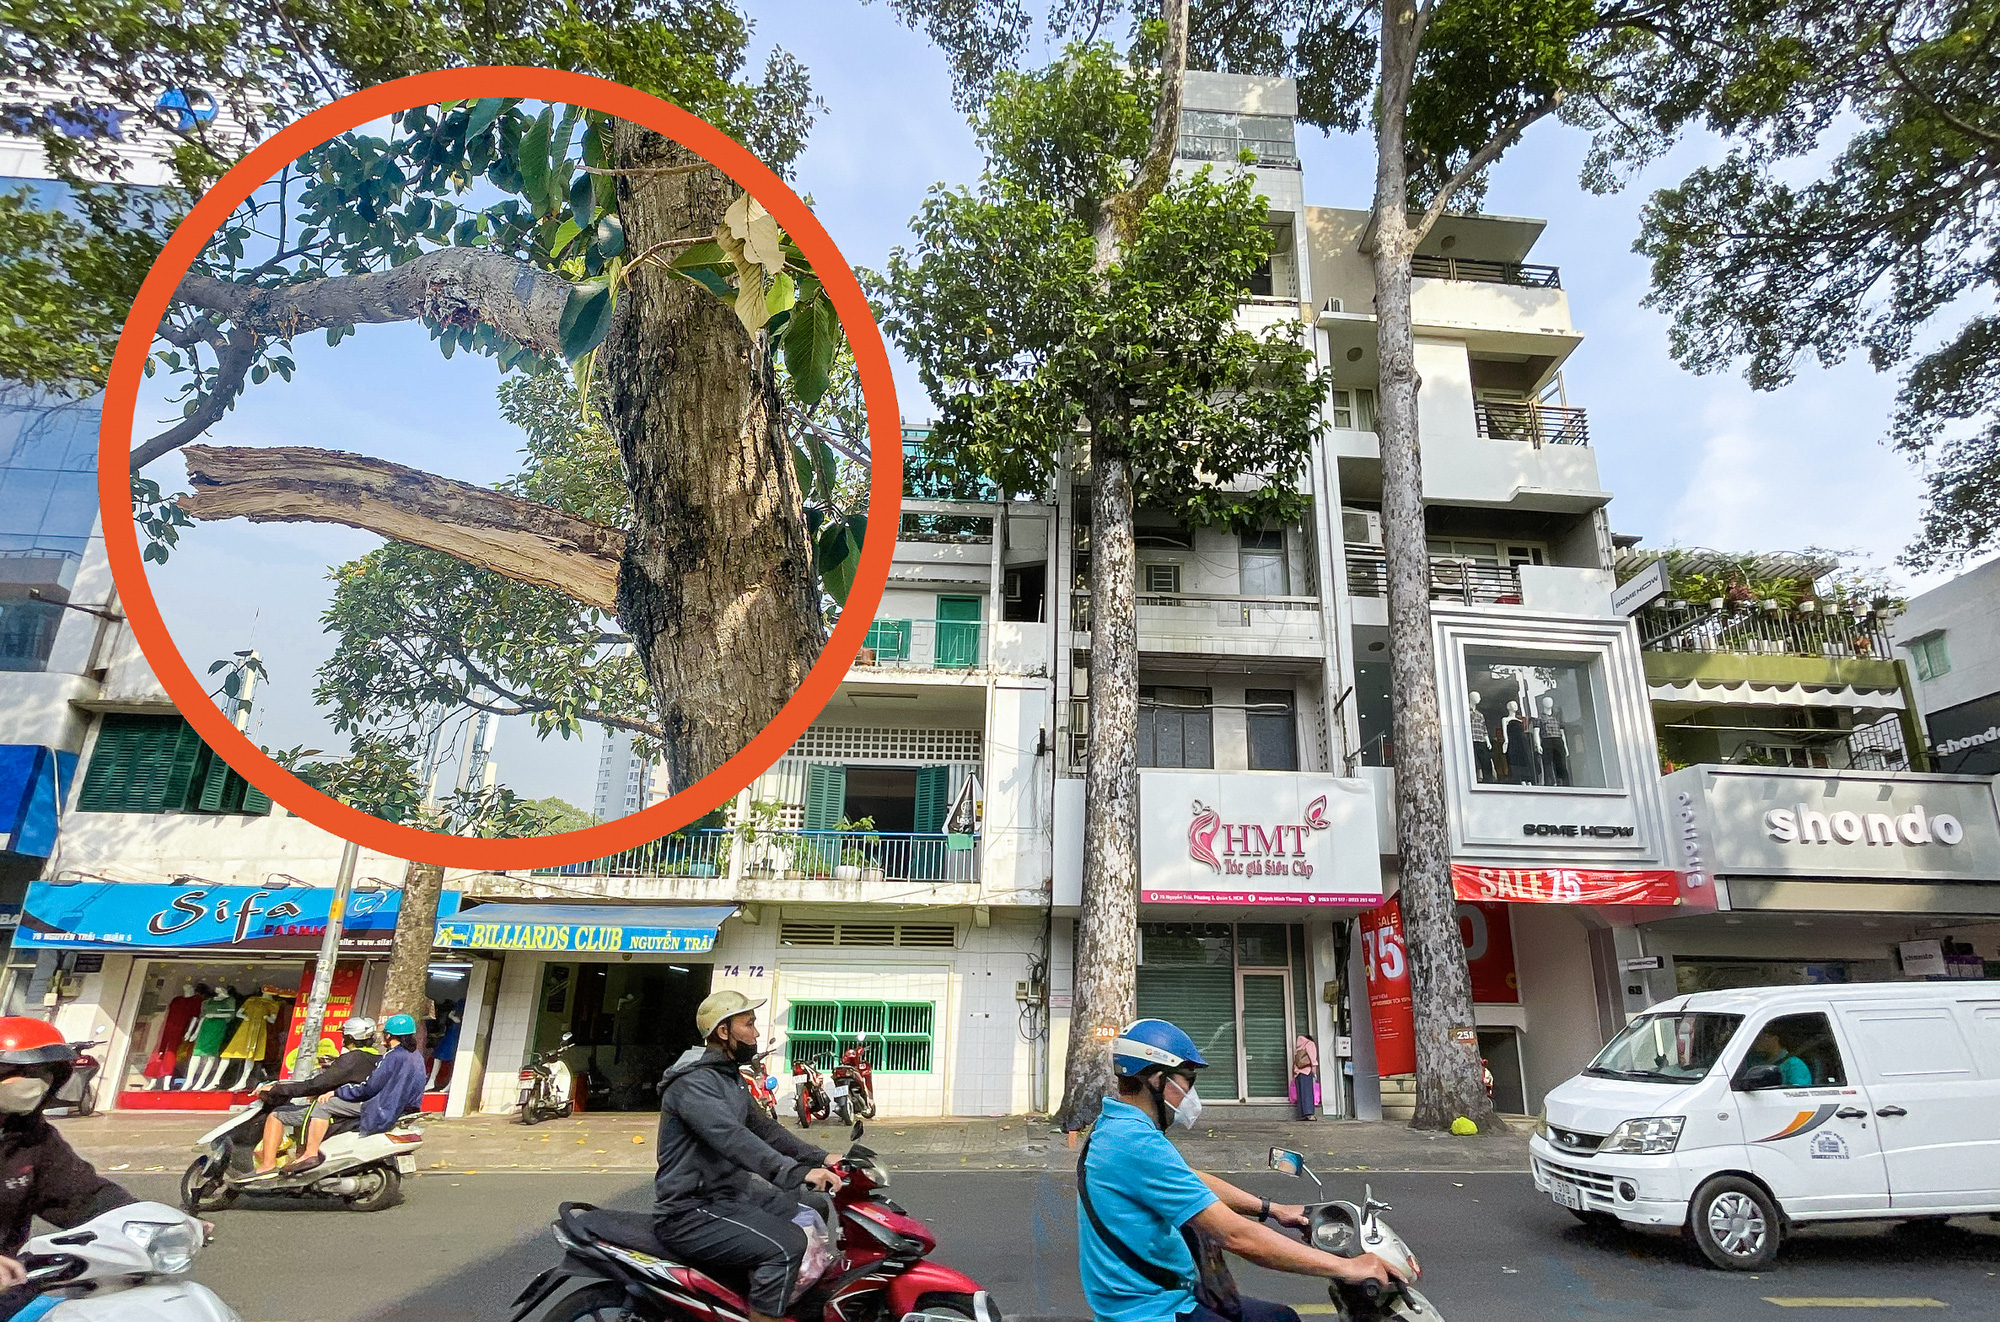 Ho Chi Minh City greenery company confirms proper maintenance after fallen branch killed resident